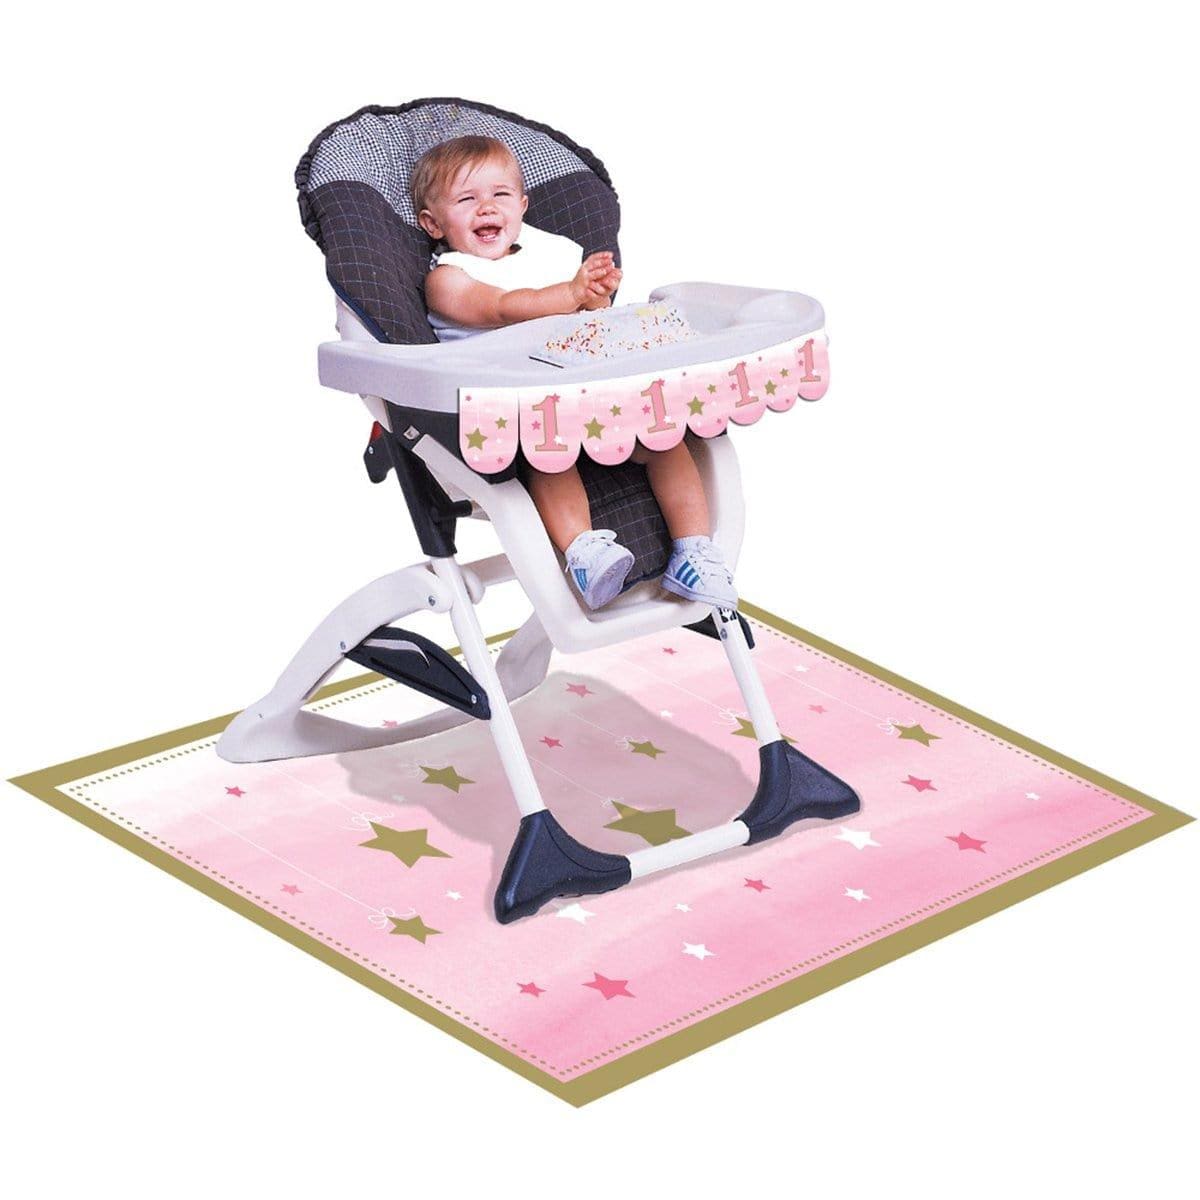 Buy 1st Birthday One Little Star Girl - High Chair Kit sold at Party Expert